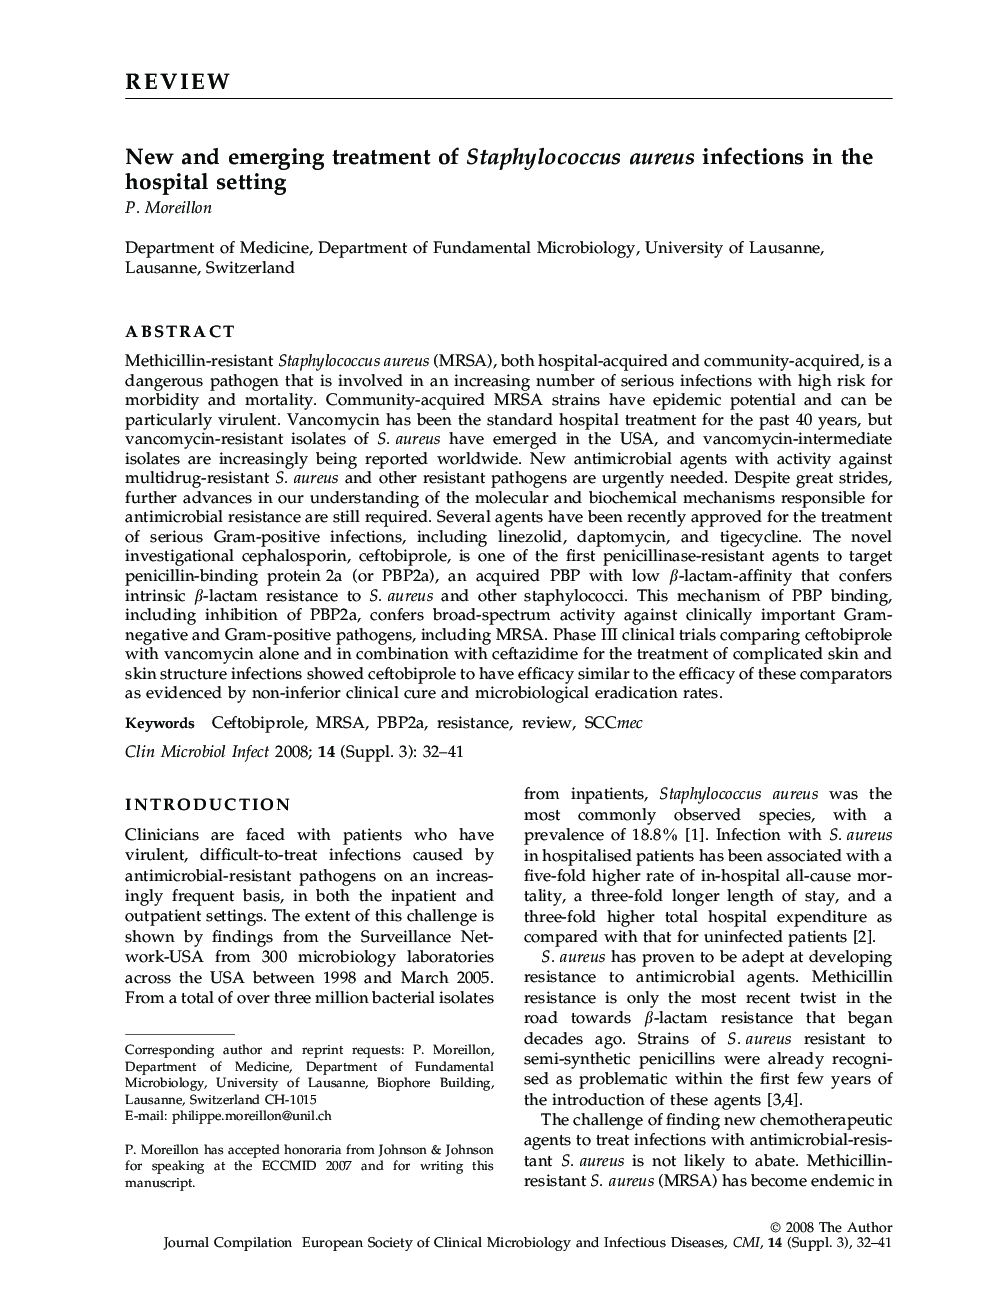 New and emerging treatment of Staphylococcus aureus infections in the hospital setting 